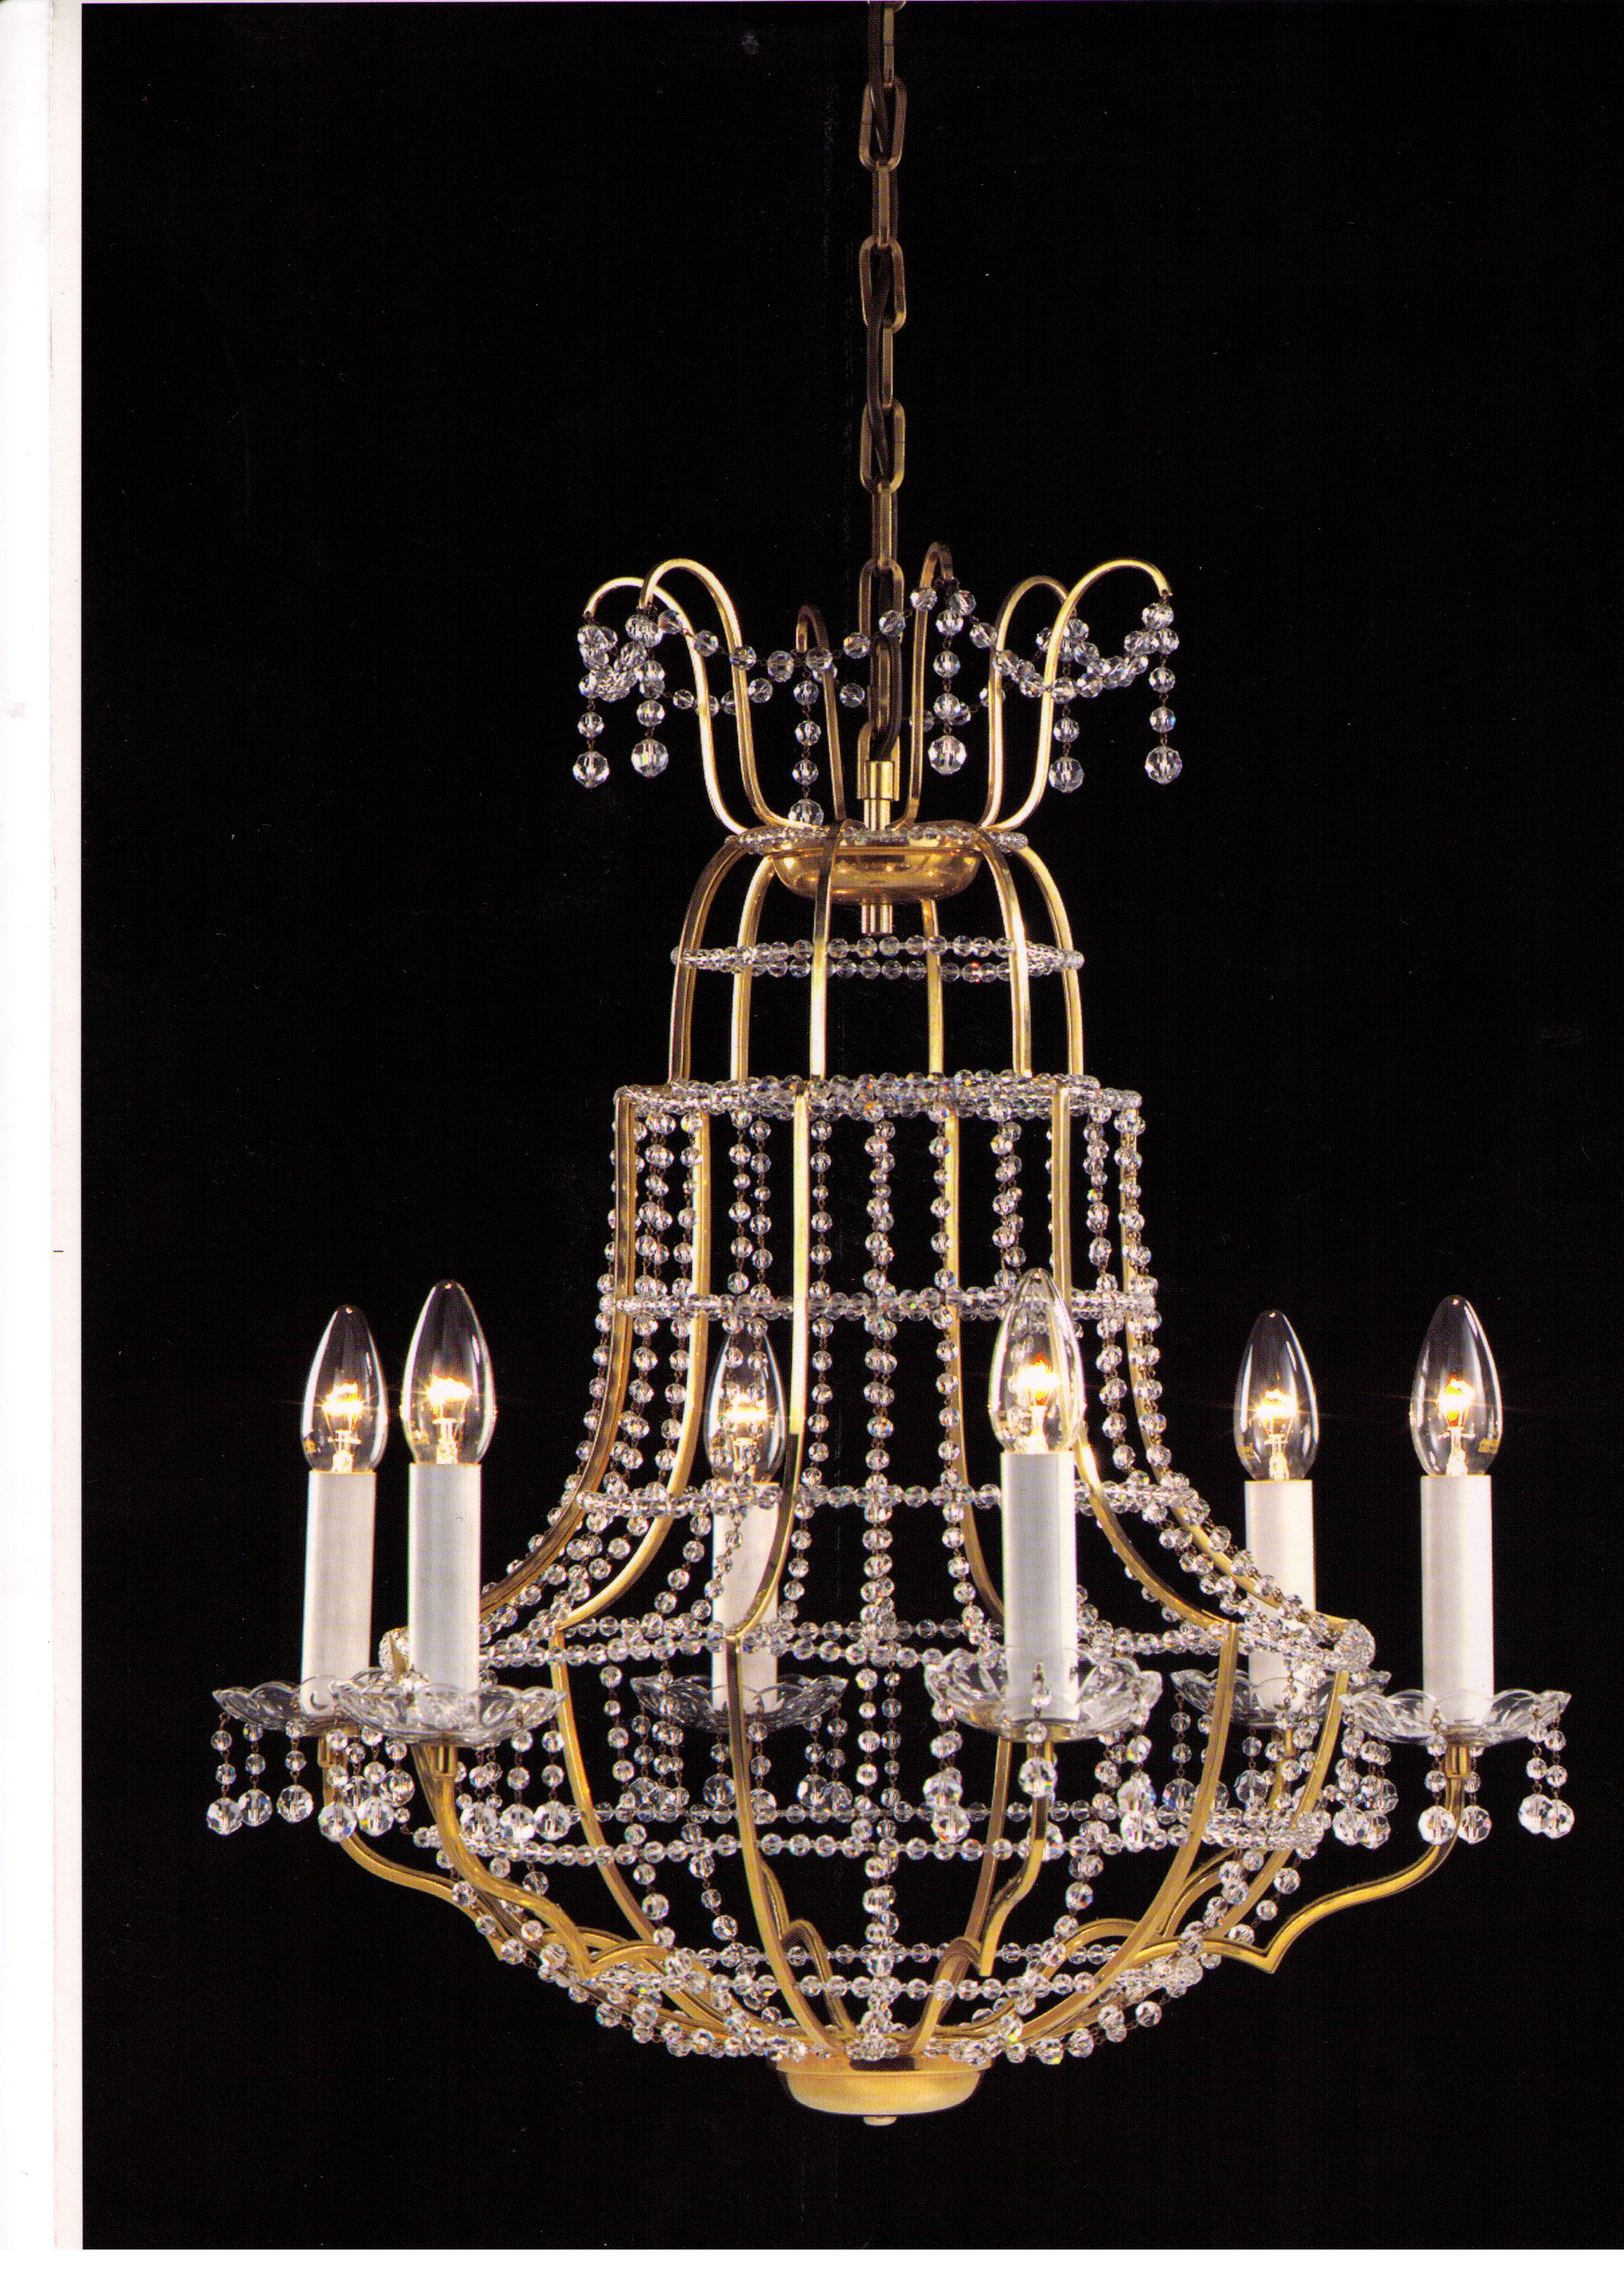 Glamorous chandelier with shiny strass crystals 

USA and CAN:
All electrical components according to the UL regulations.
With an additional charge the fixture will be labeled 